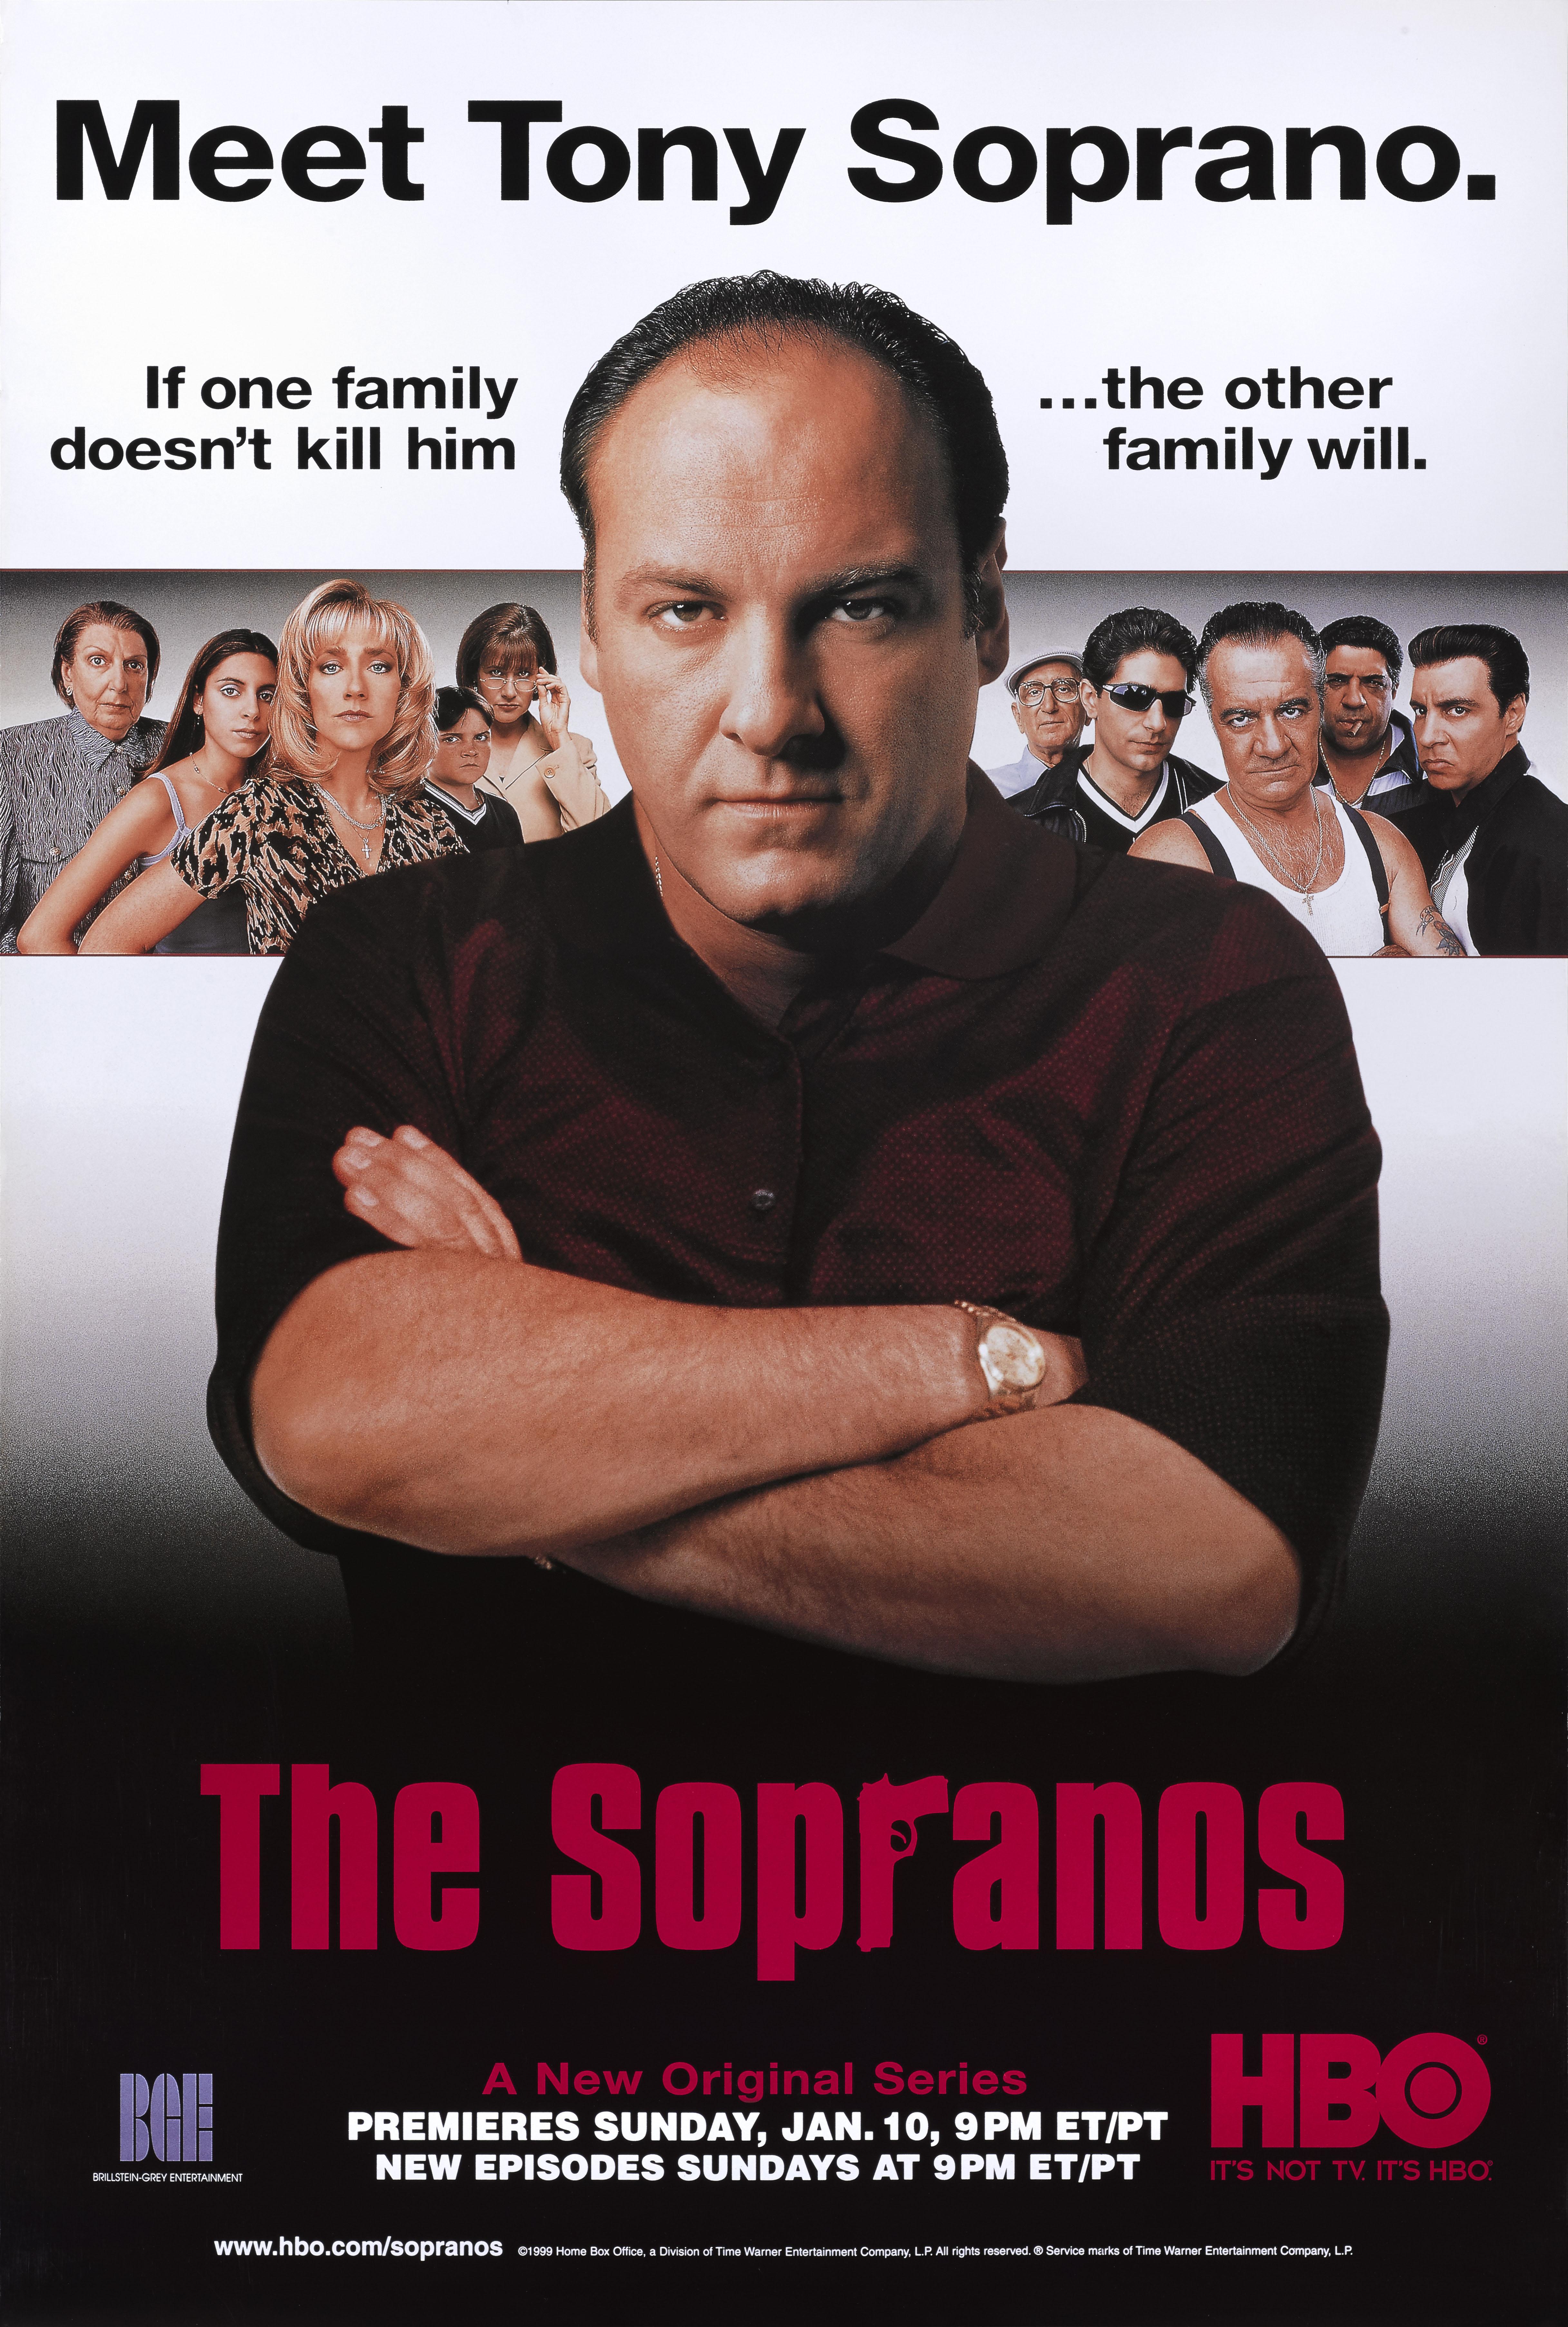 Original US poster for The Sopranos.
The show premiered on HBO on January 10, 1999. The series ran for 86 episodes until 2007.
The poster was used to advertise the coming of the series on HBO 
It is unfolded and would be shipped in a very strong